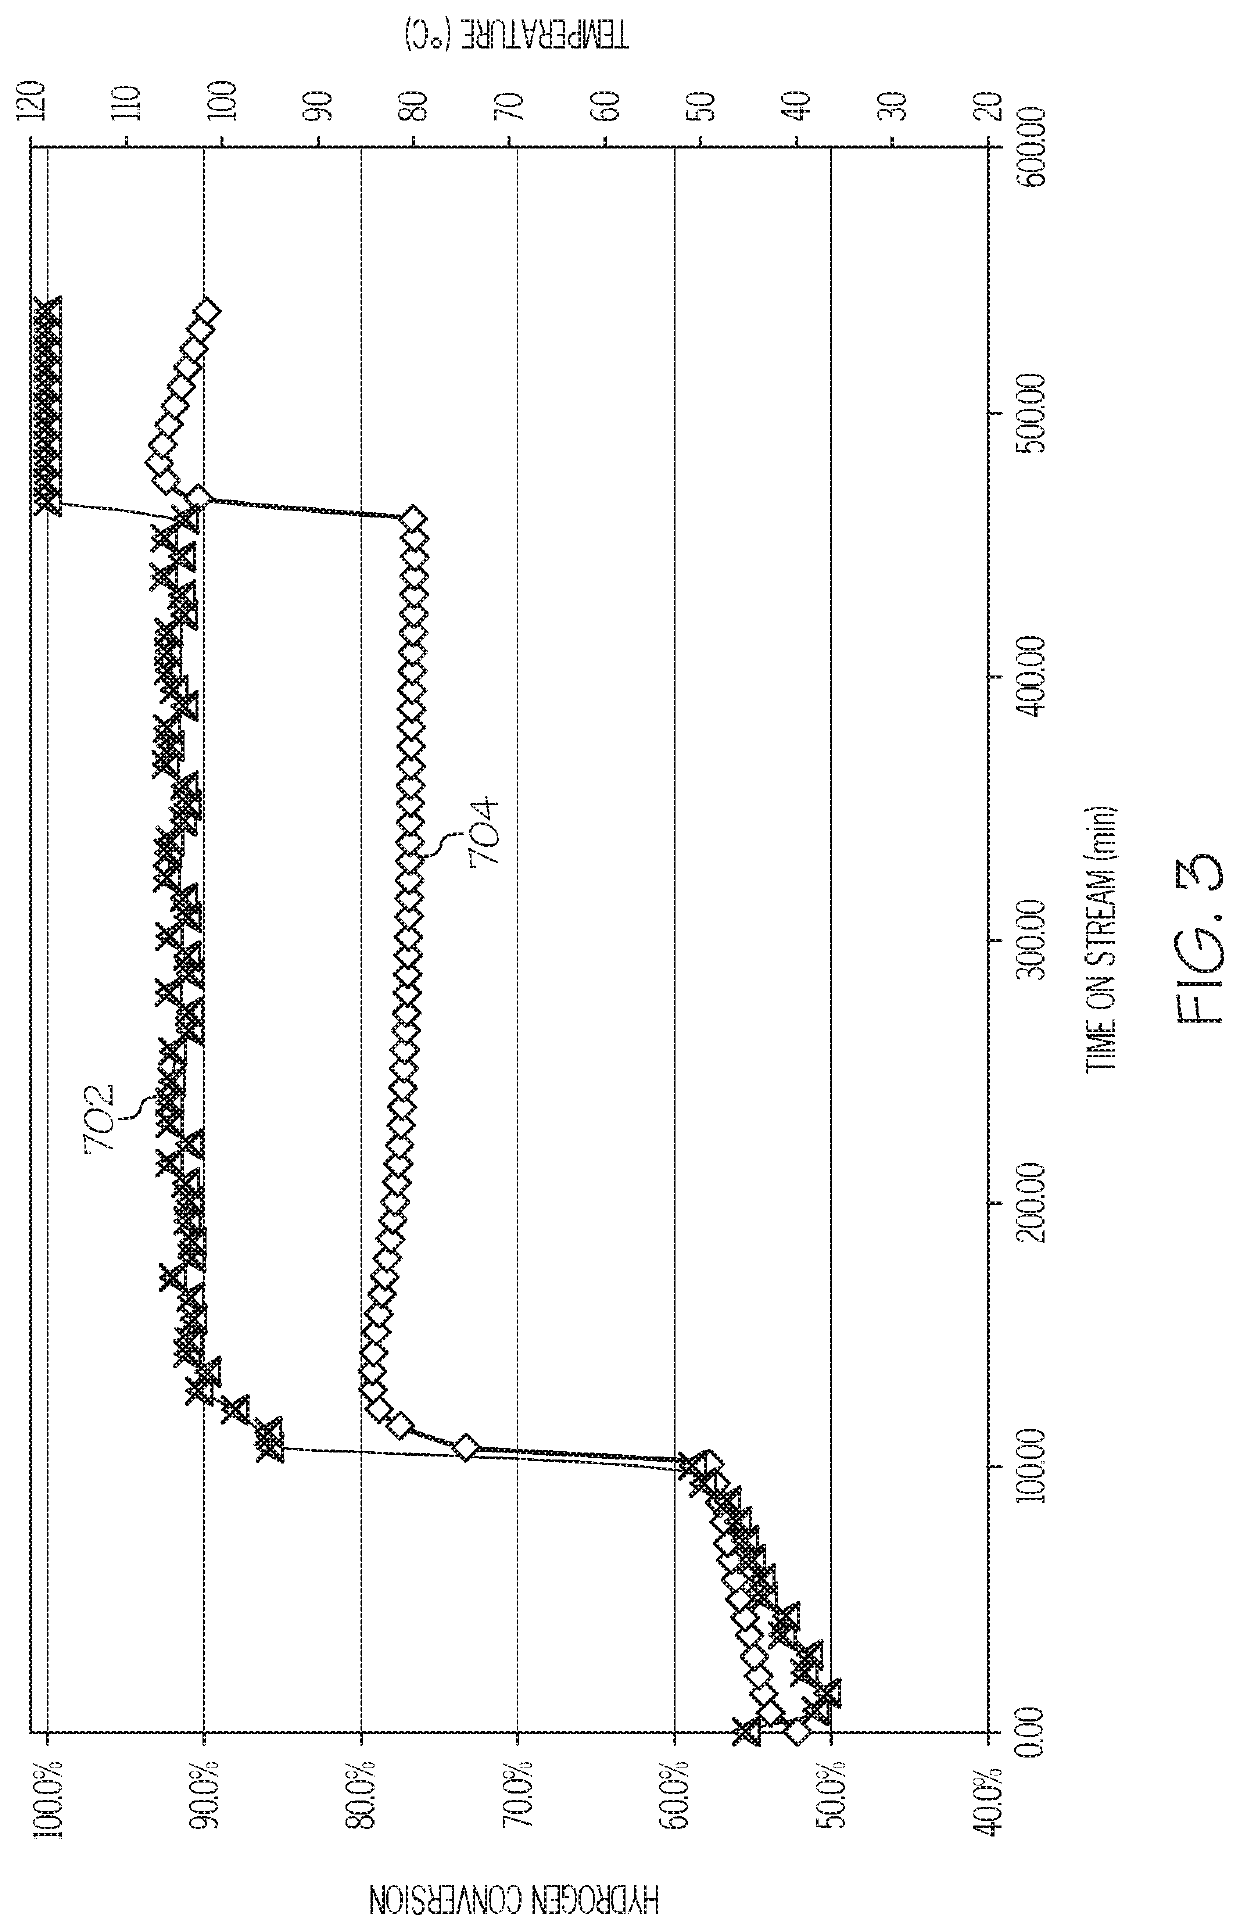 Processes for commencing operations of fluidized catalytic reactor systems